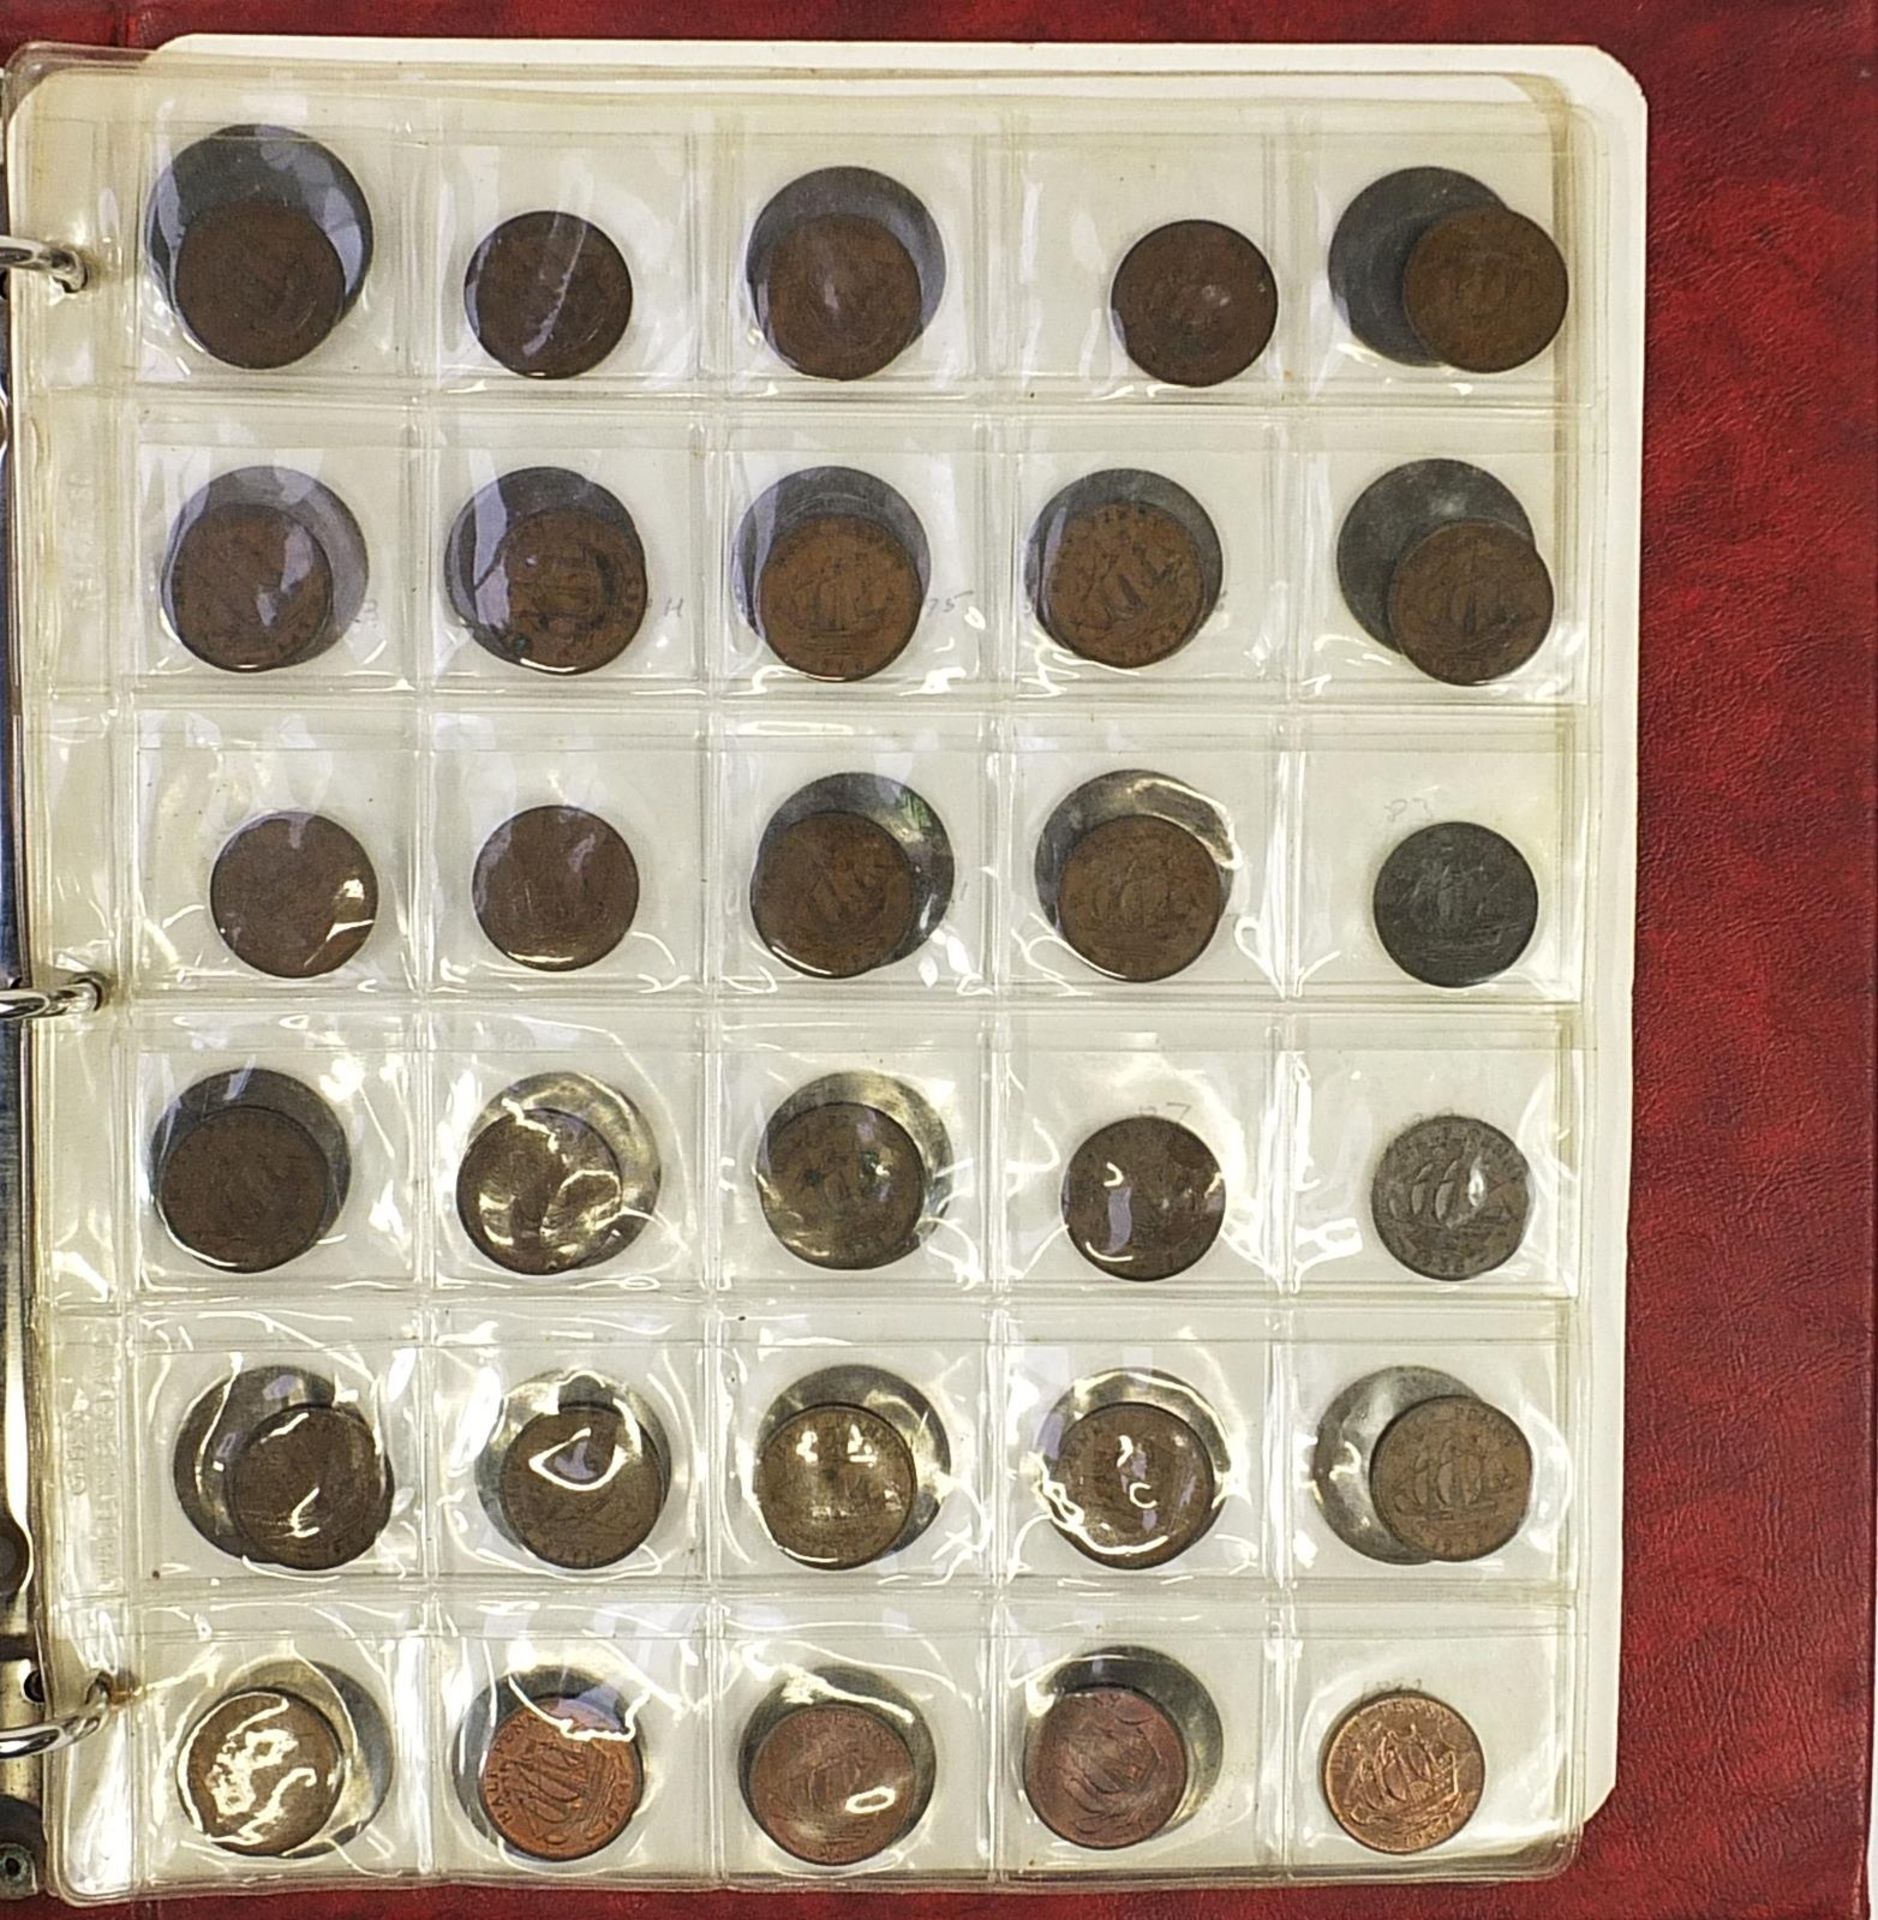 George III and later British coinage arranged in an album including cartwheel two pence and pennies - Image 4 of 6